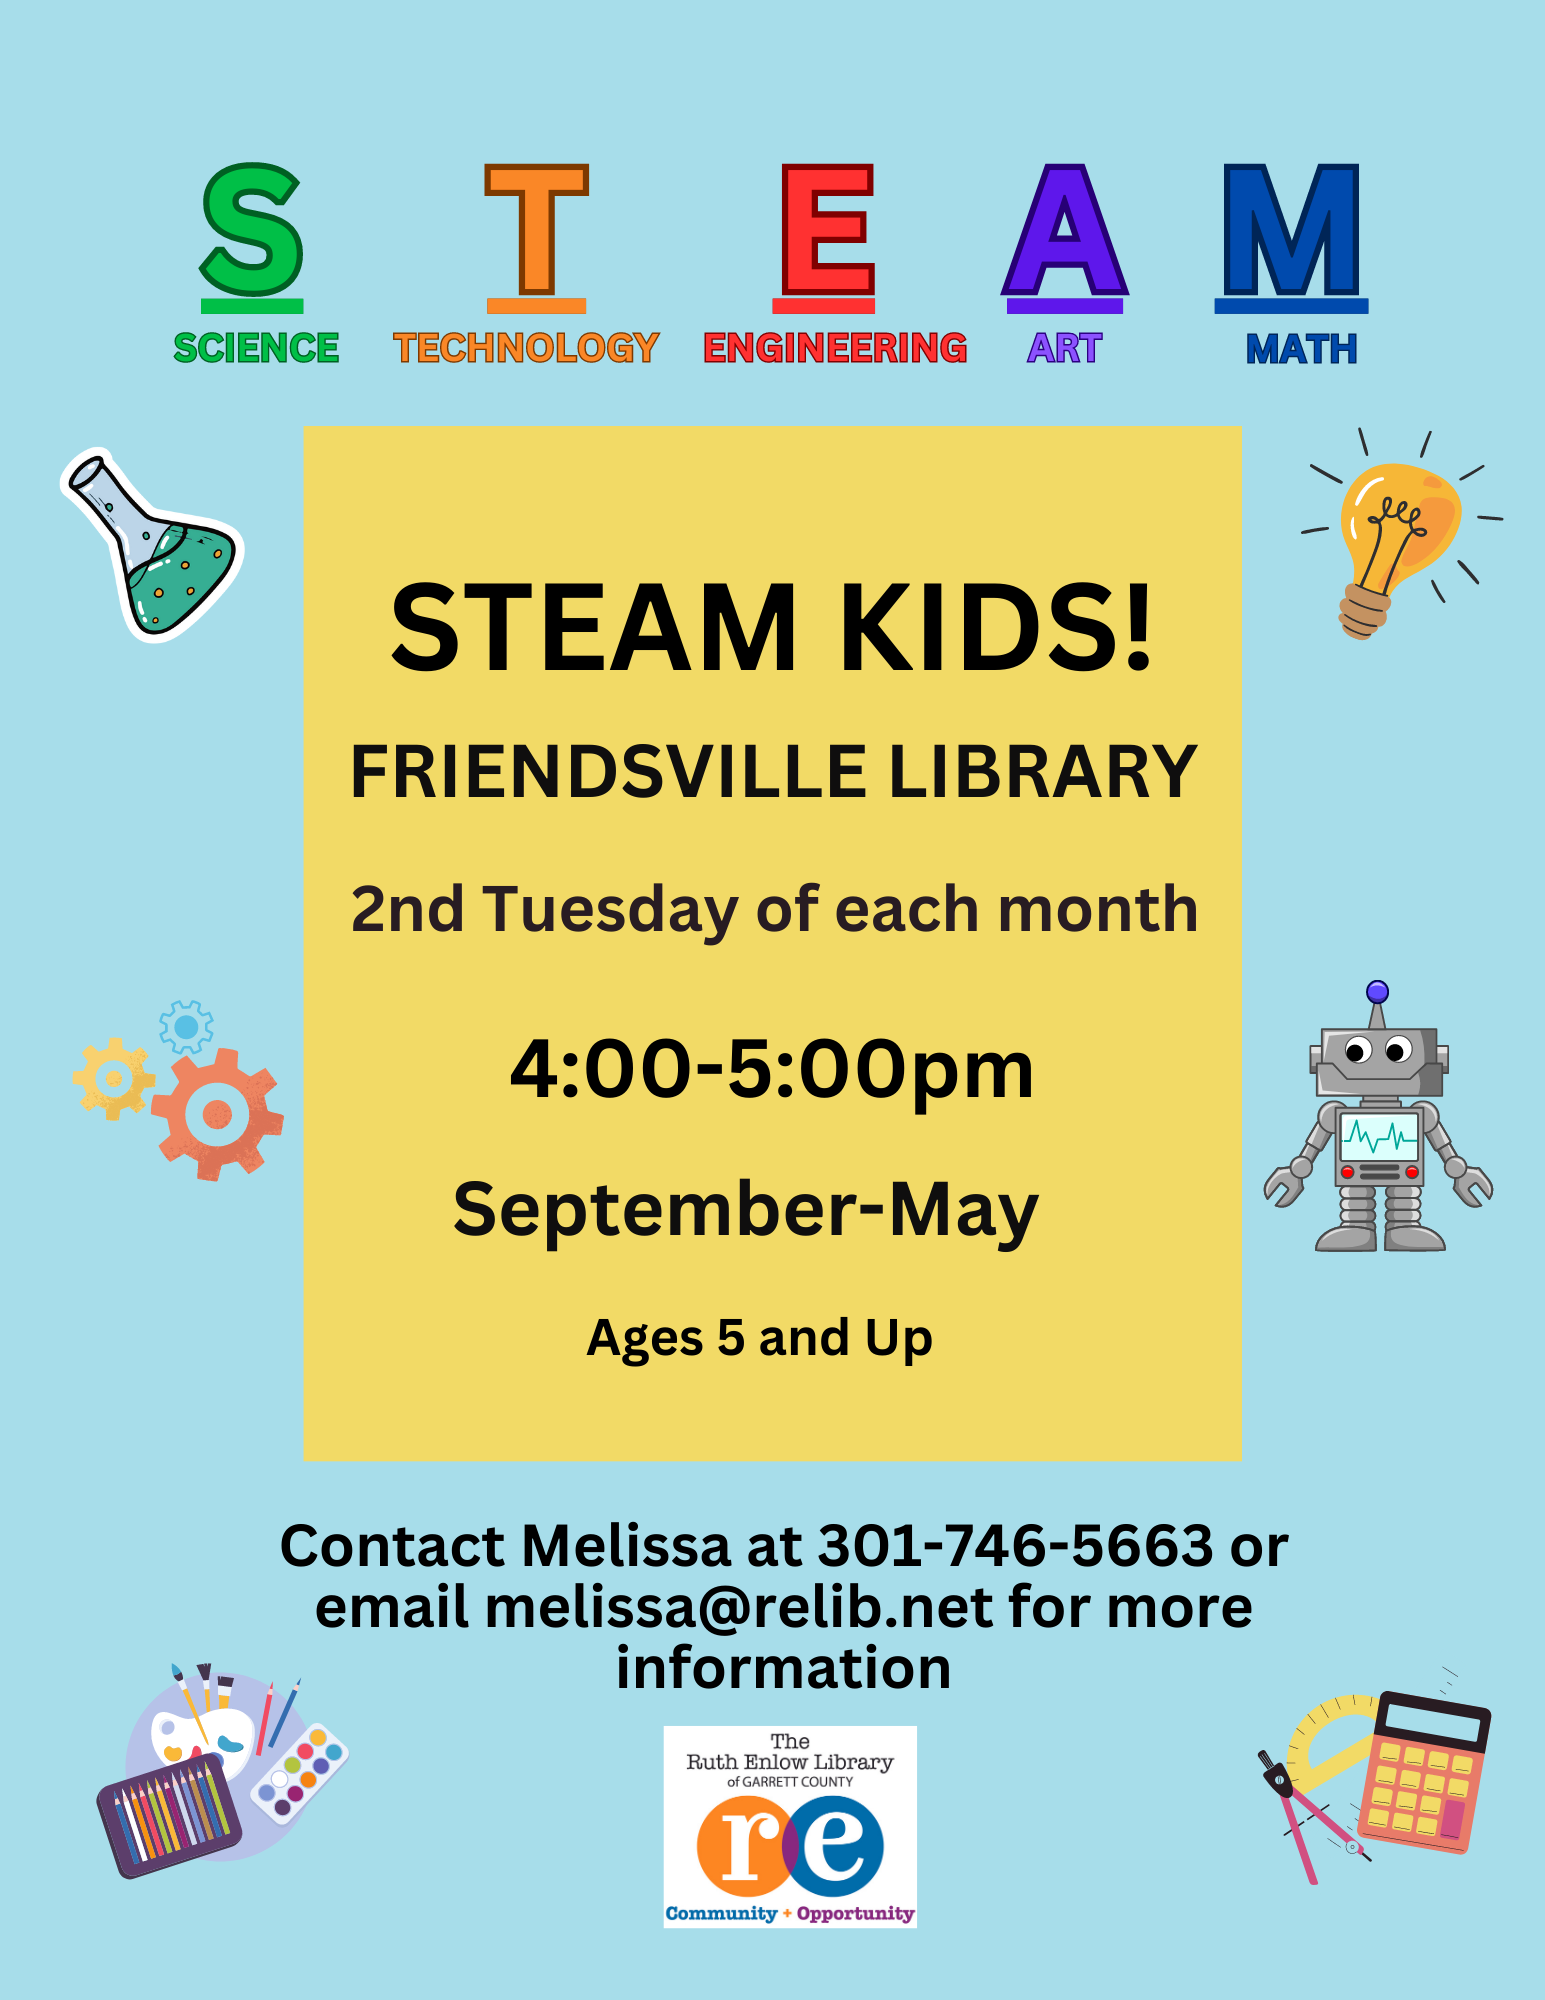 Detailed flyer about STEAM Kids program at the Friendsville Library